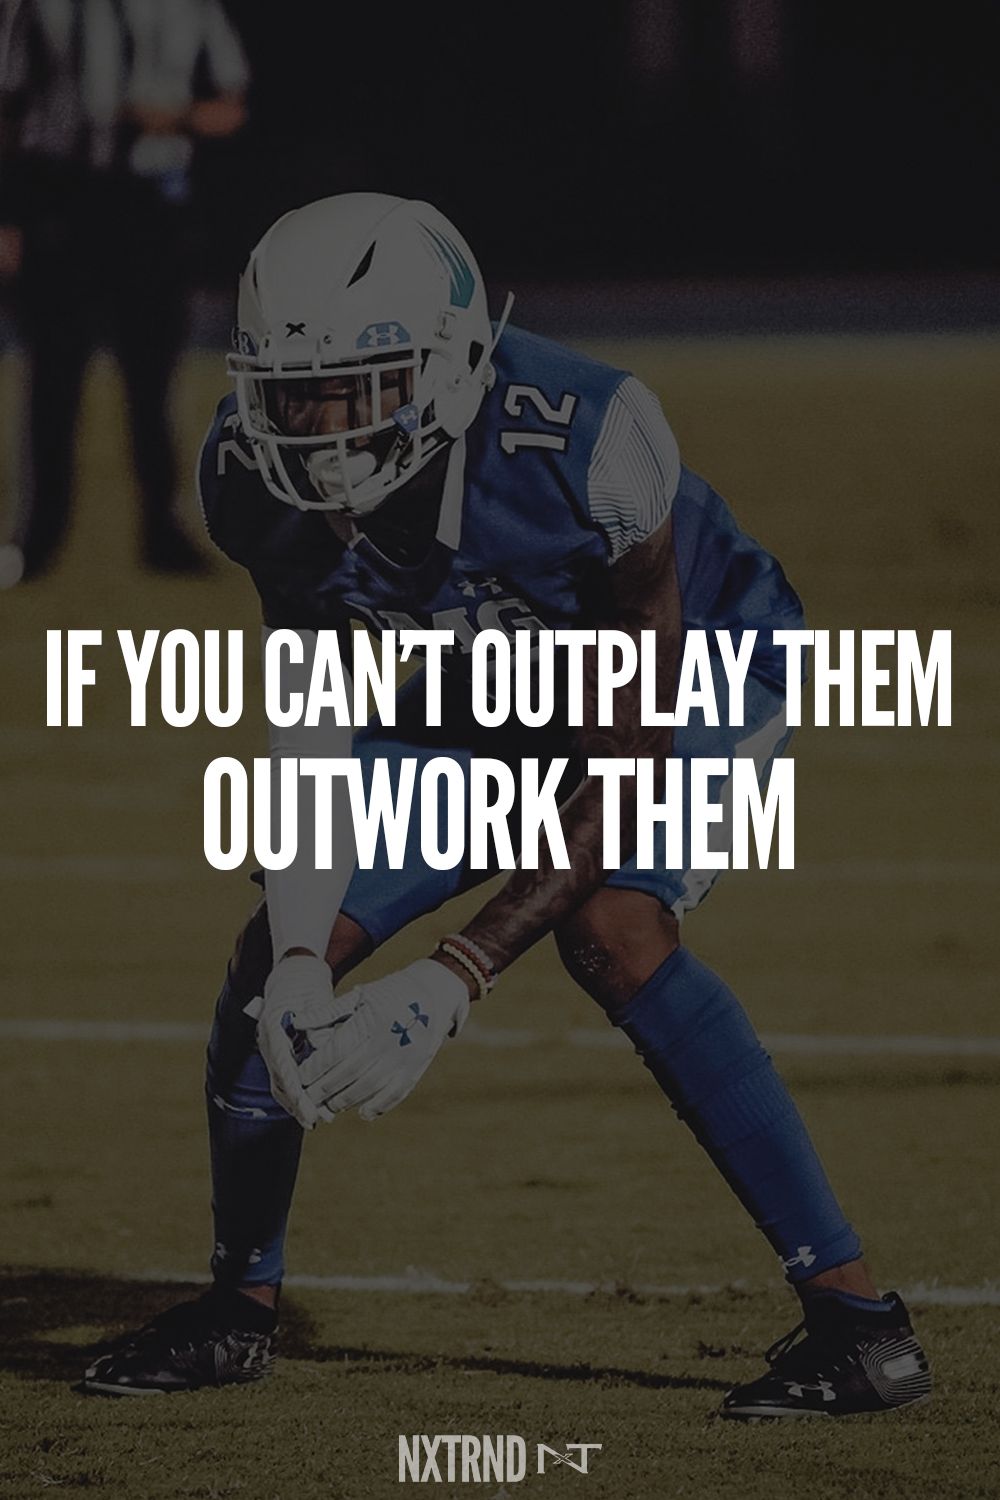 If you can't outplay them, outwork them with these 20 Famous Sports Quotes to Get You Pumped.